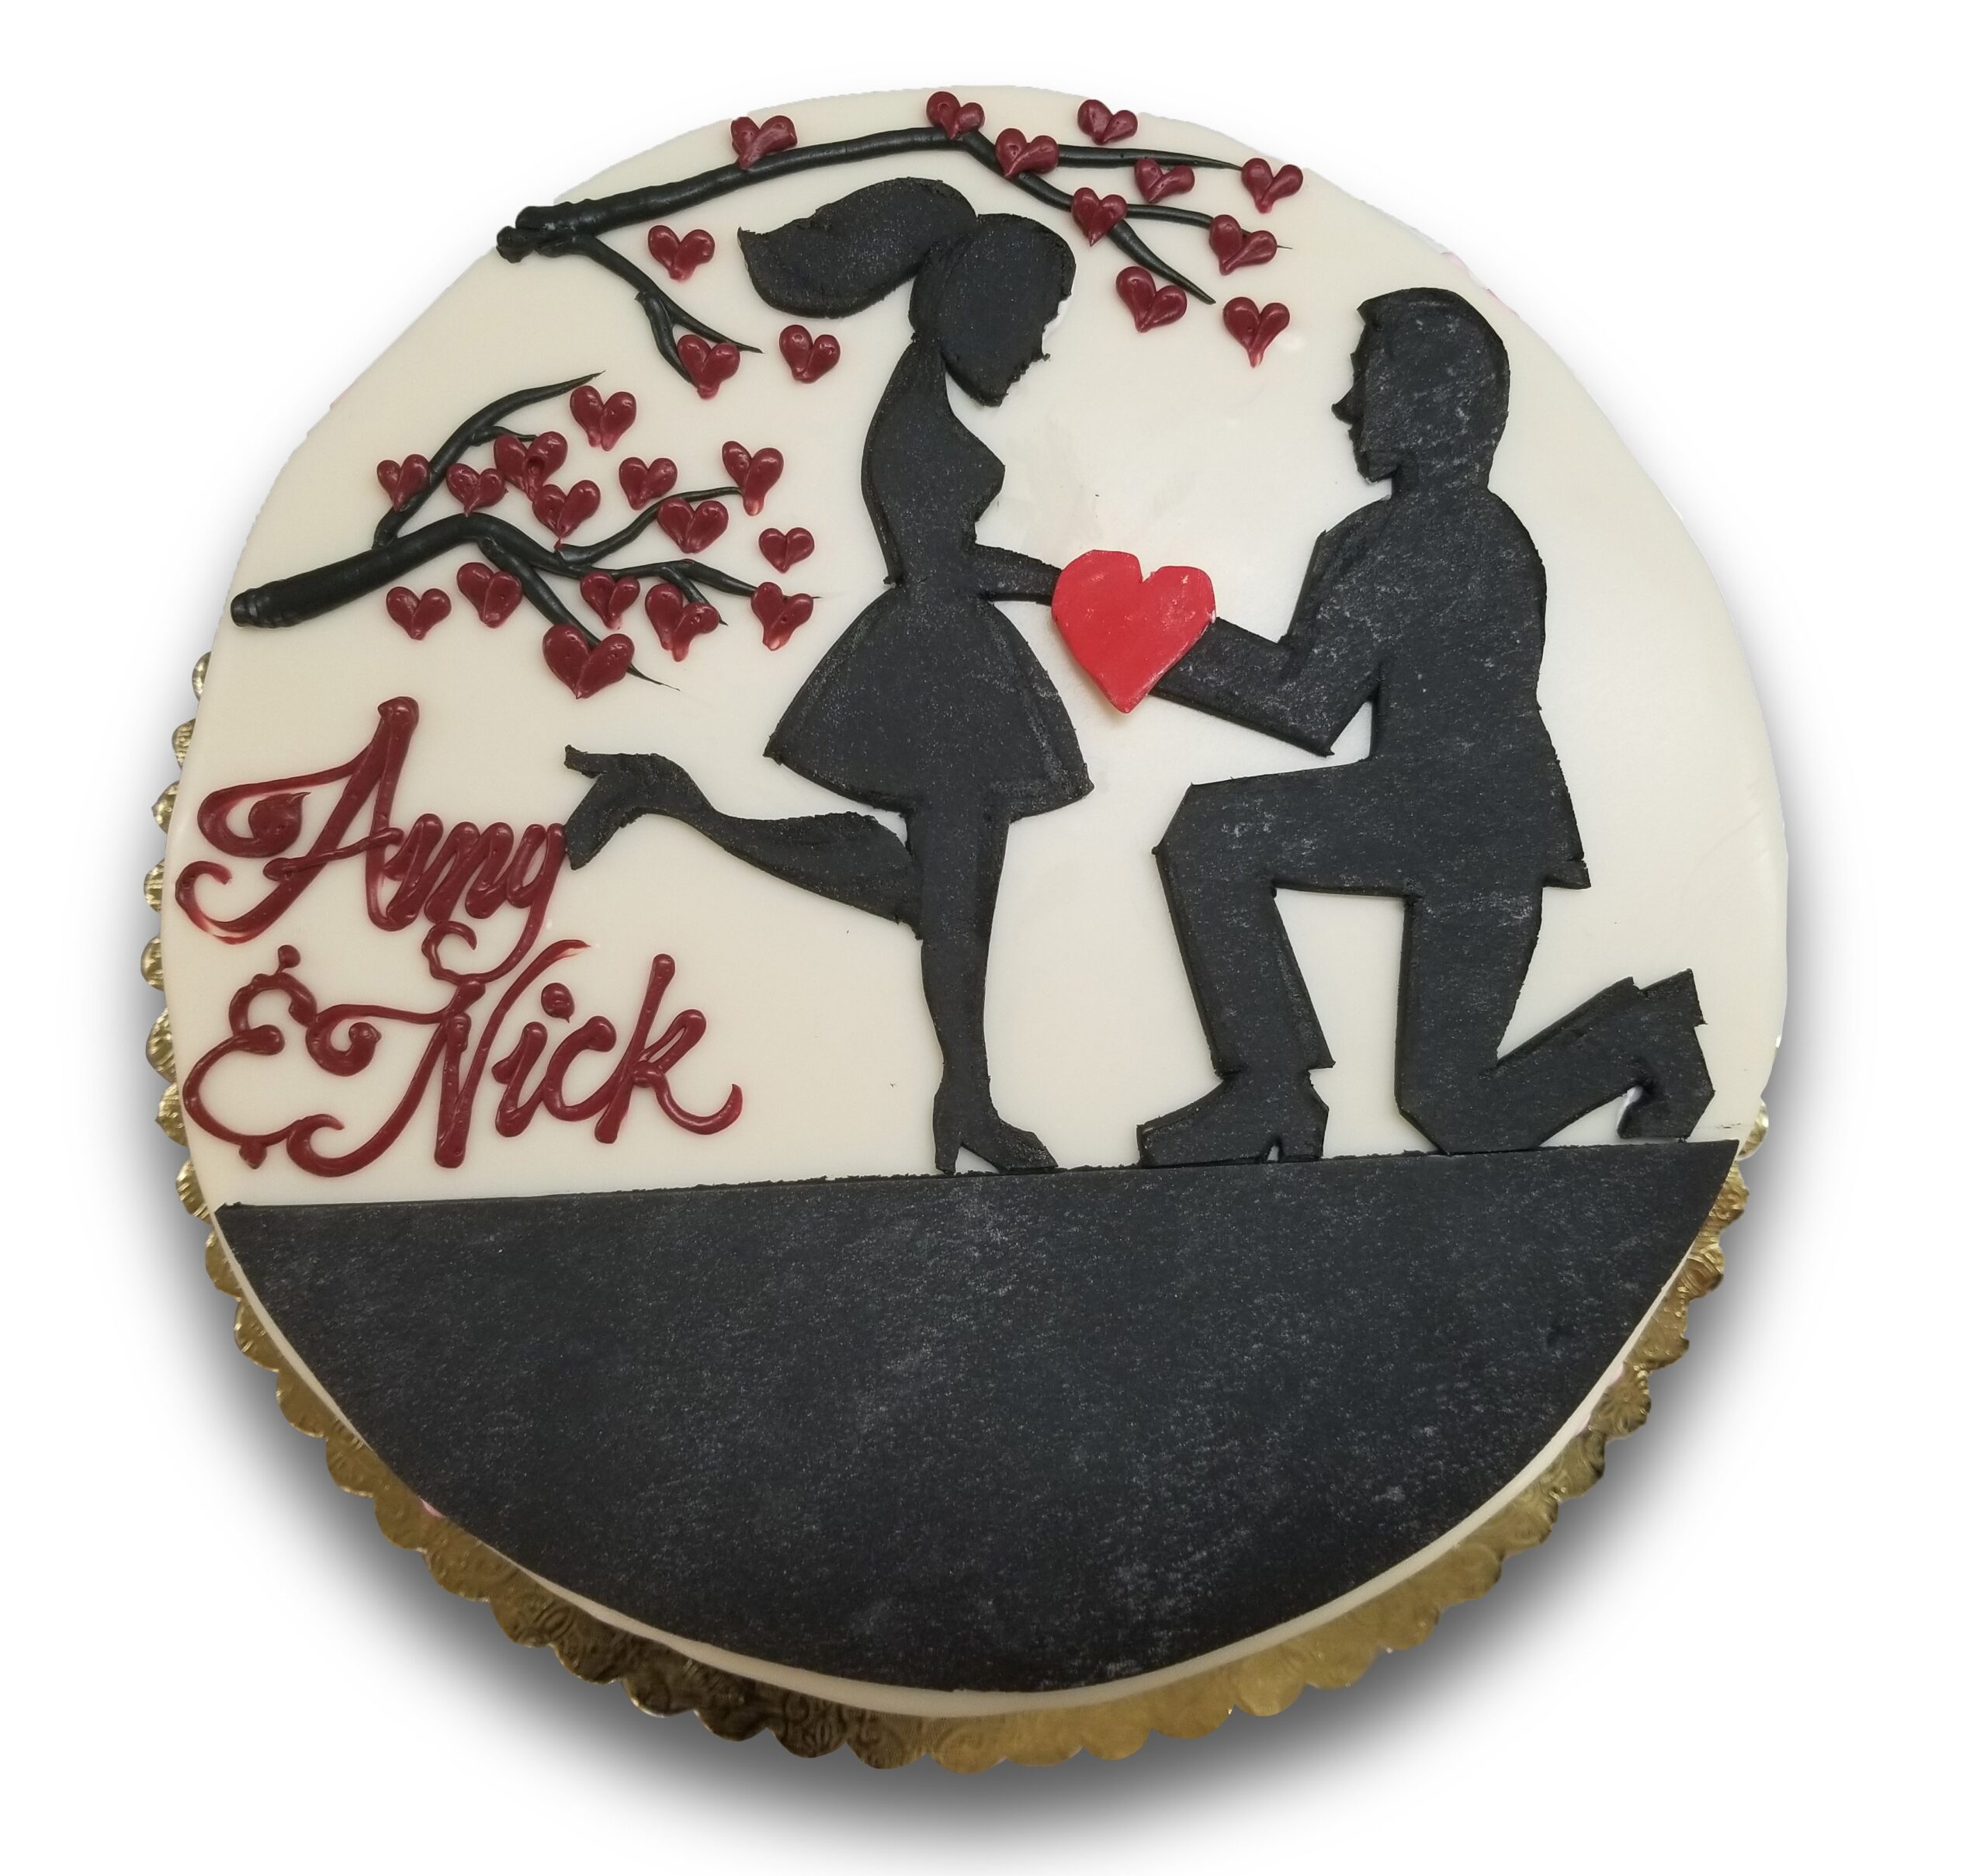 Fondant covered cake with fondant silhouette